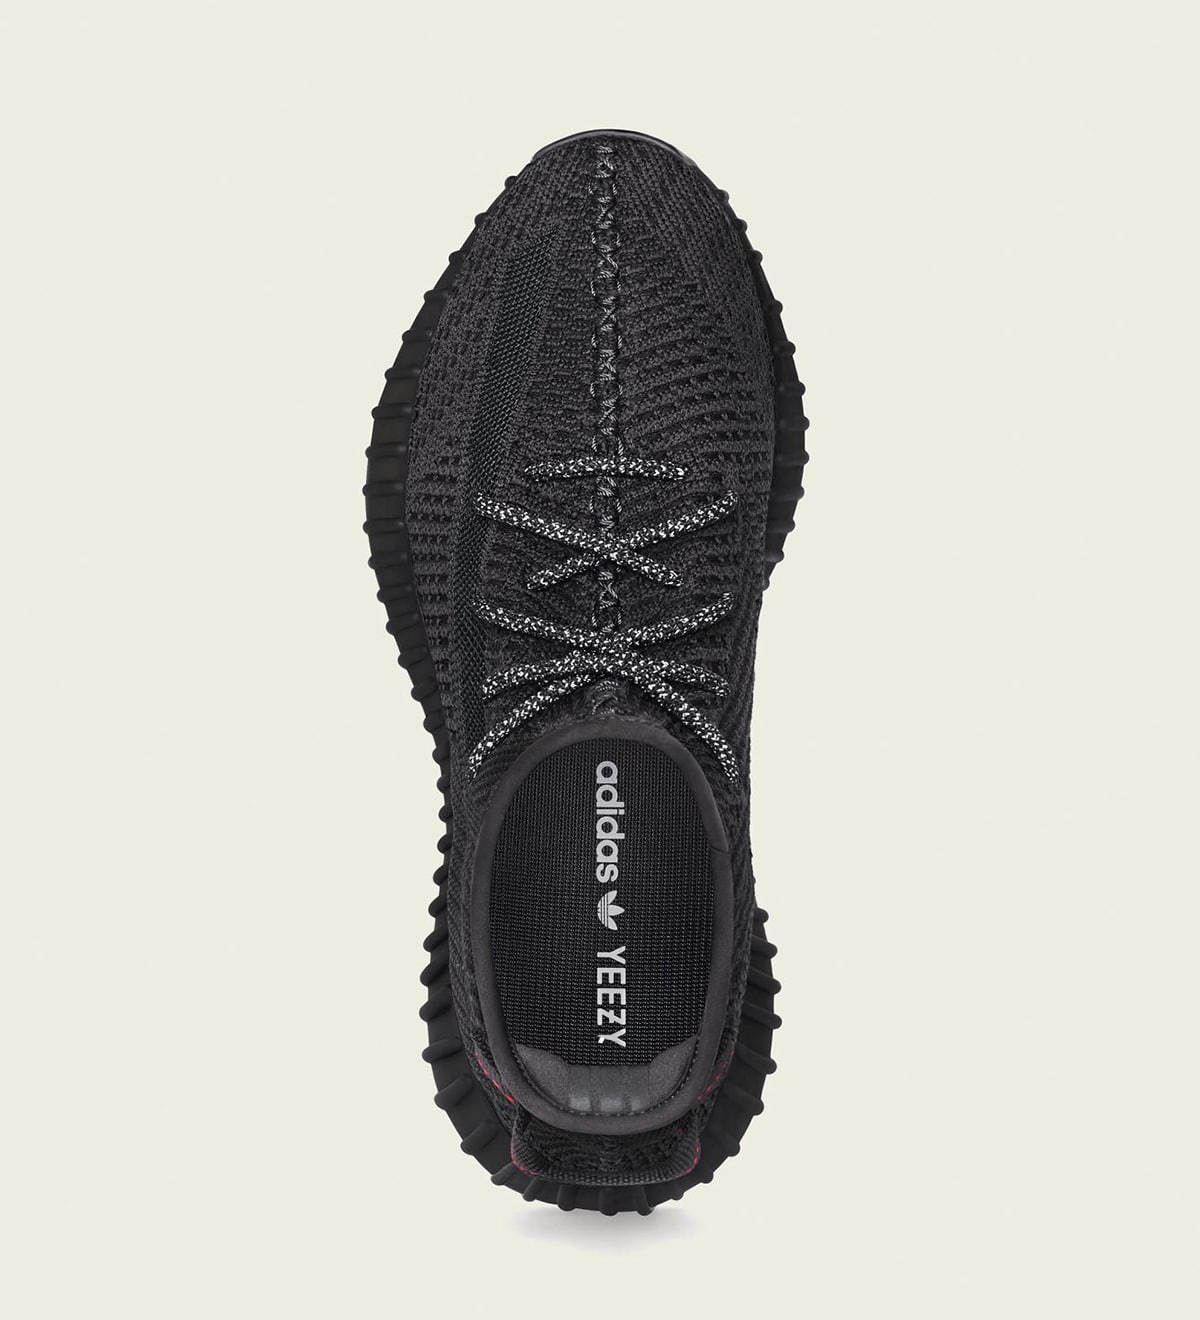 yeezy shoes black friday